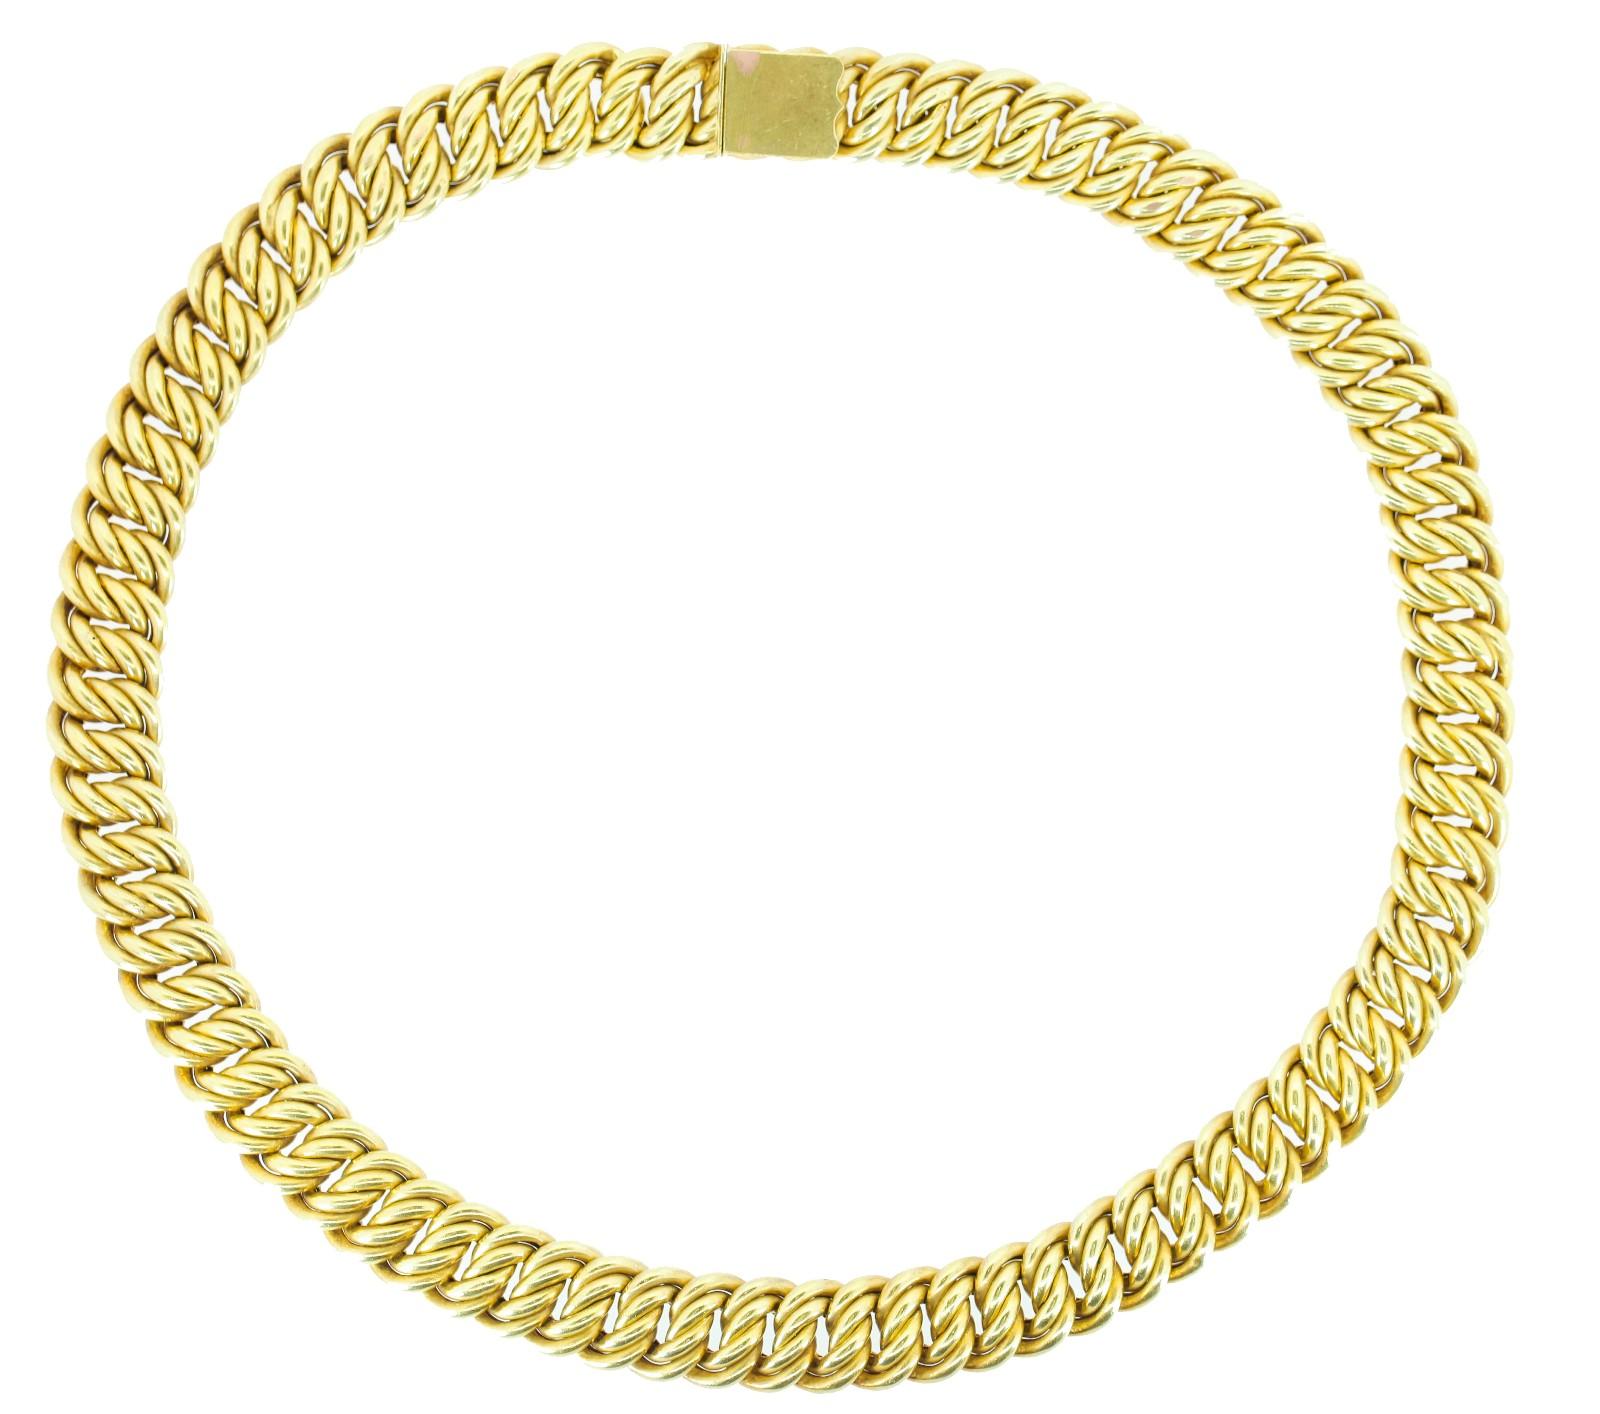 This beautiful 1940s necklace is created of 560 content yellow gold (13.45KT), indicating European origin.  The half inch wide intertwined links feature a delicate swirl and dimple embossing.  Quite special, the 18 inch long necklace feels